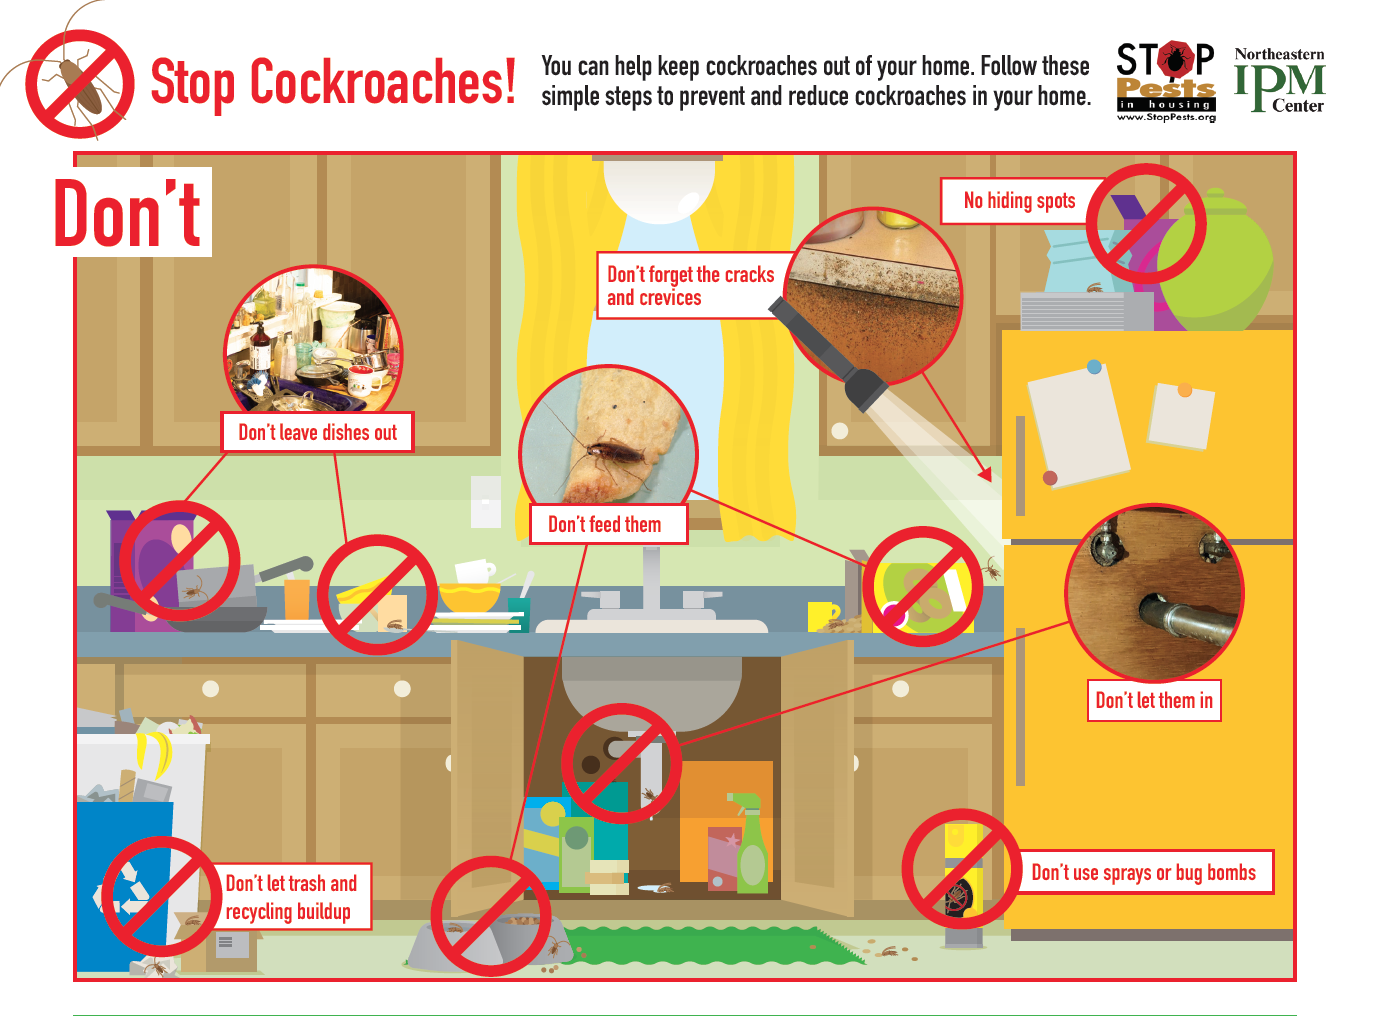 Stop Cockroaches! picture-based guide